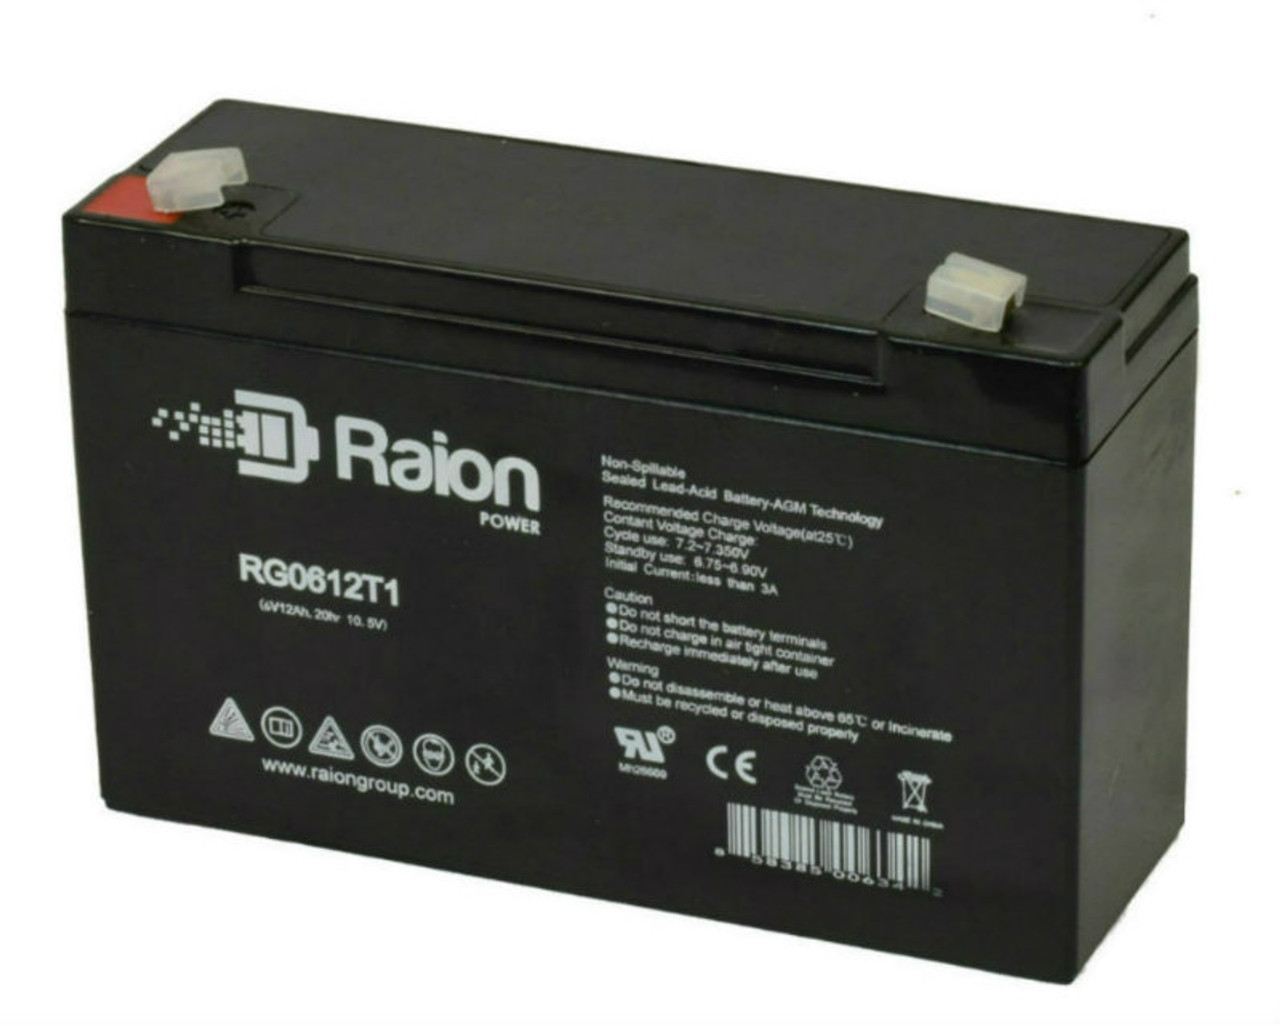 Raion Power RG06120T1 Replacement Battery for Teledyne 2ET6S8